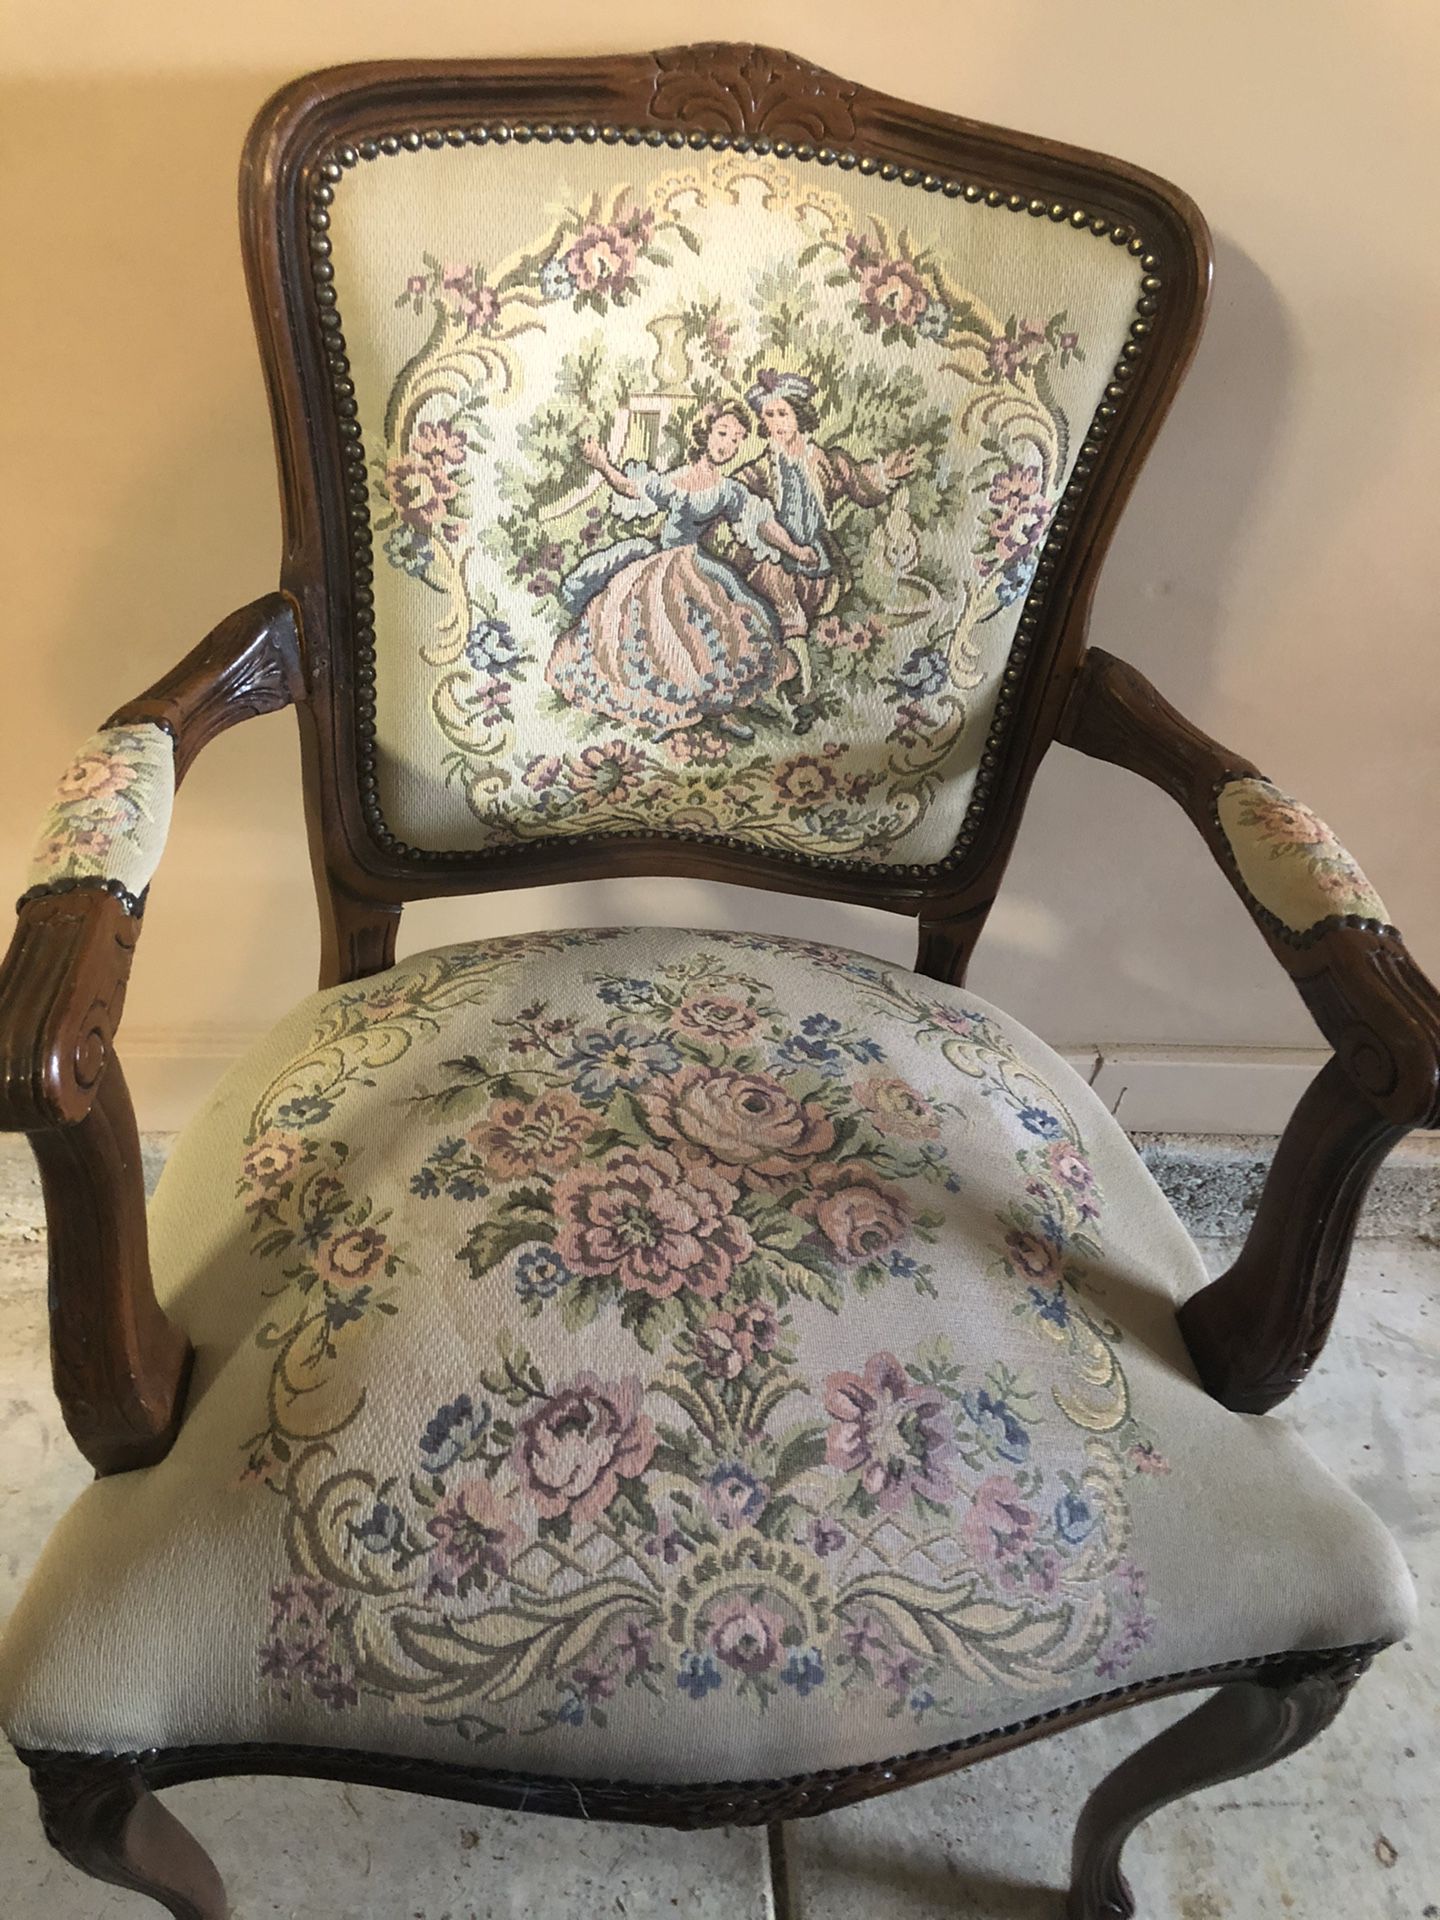 Vintage French Provincial Tapestry Ornate Carved Arm Chair